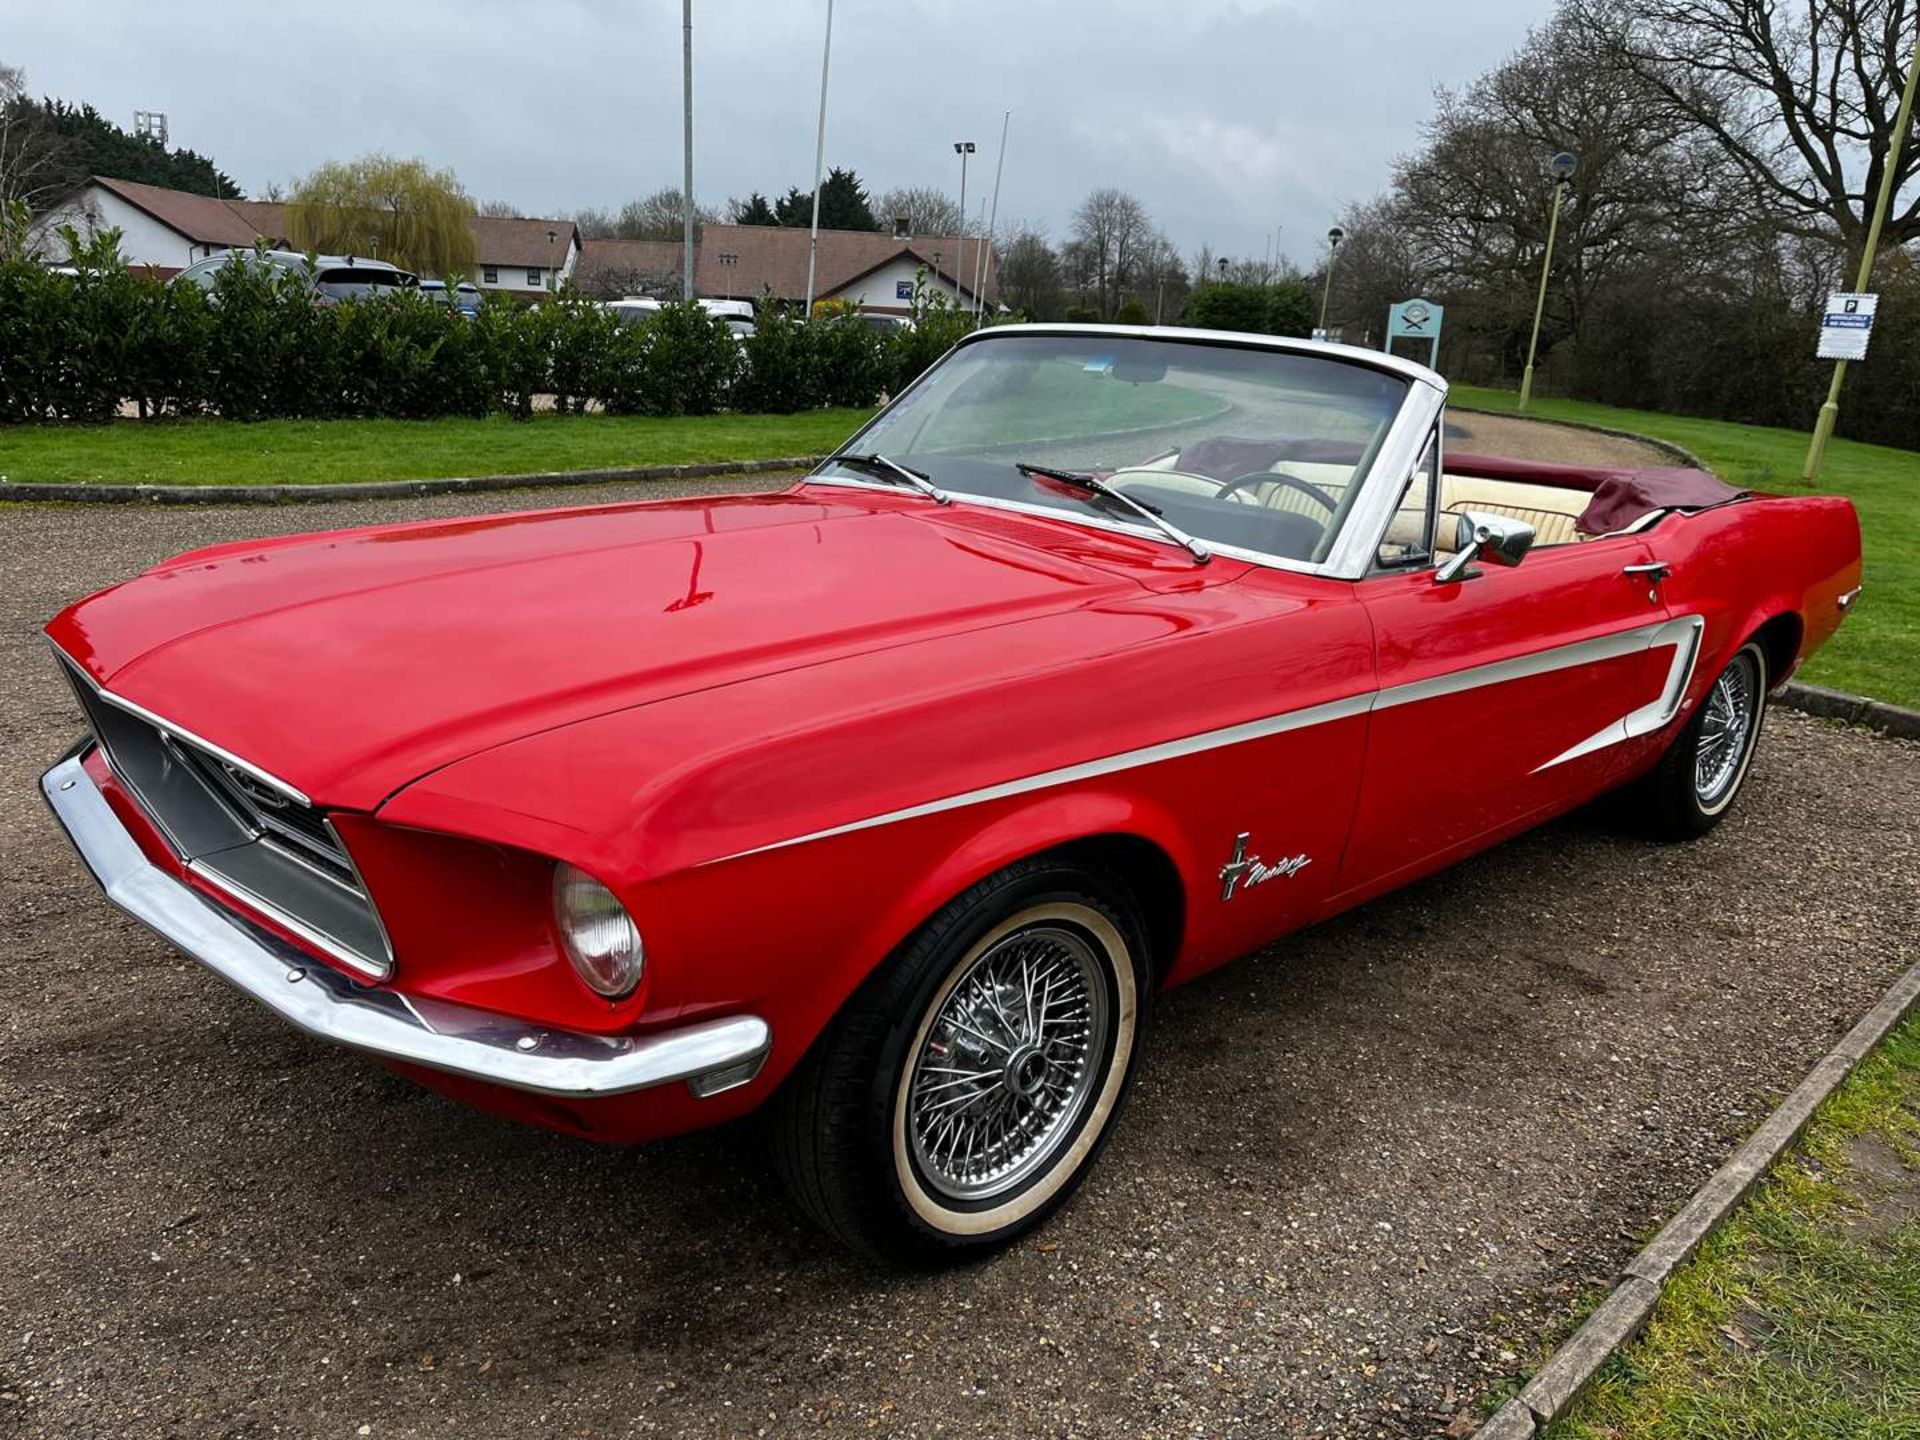 1968 FORD MUSTANG 4.7 V8 AUTO CONVERTIBLE LHD - Image 4 of 30